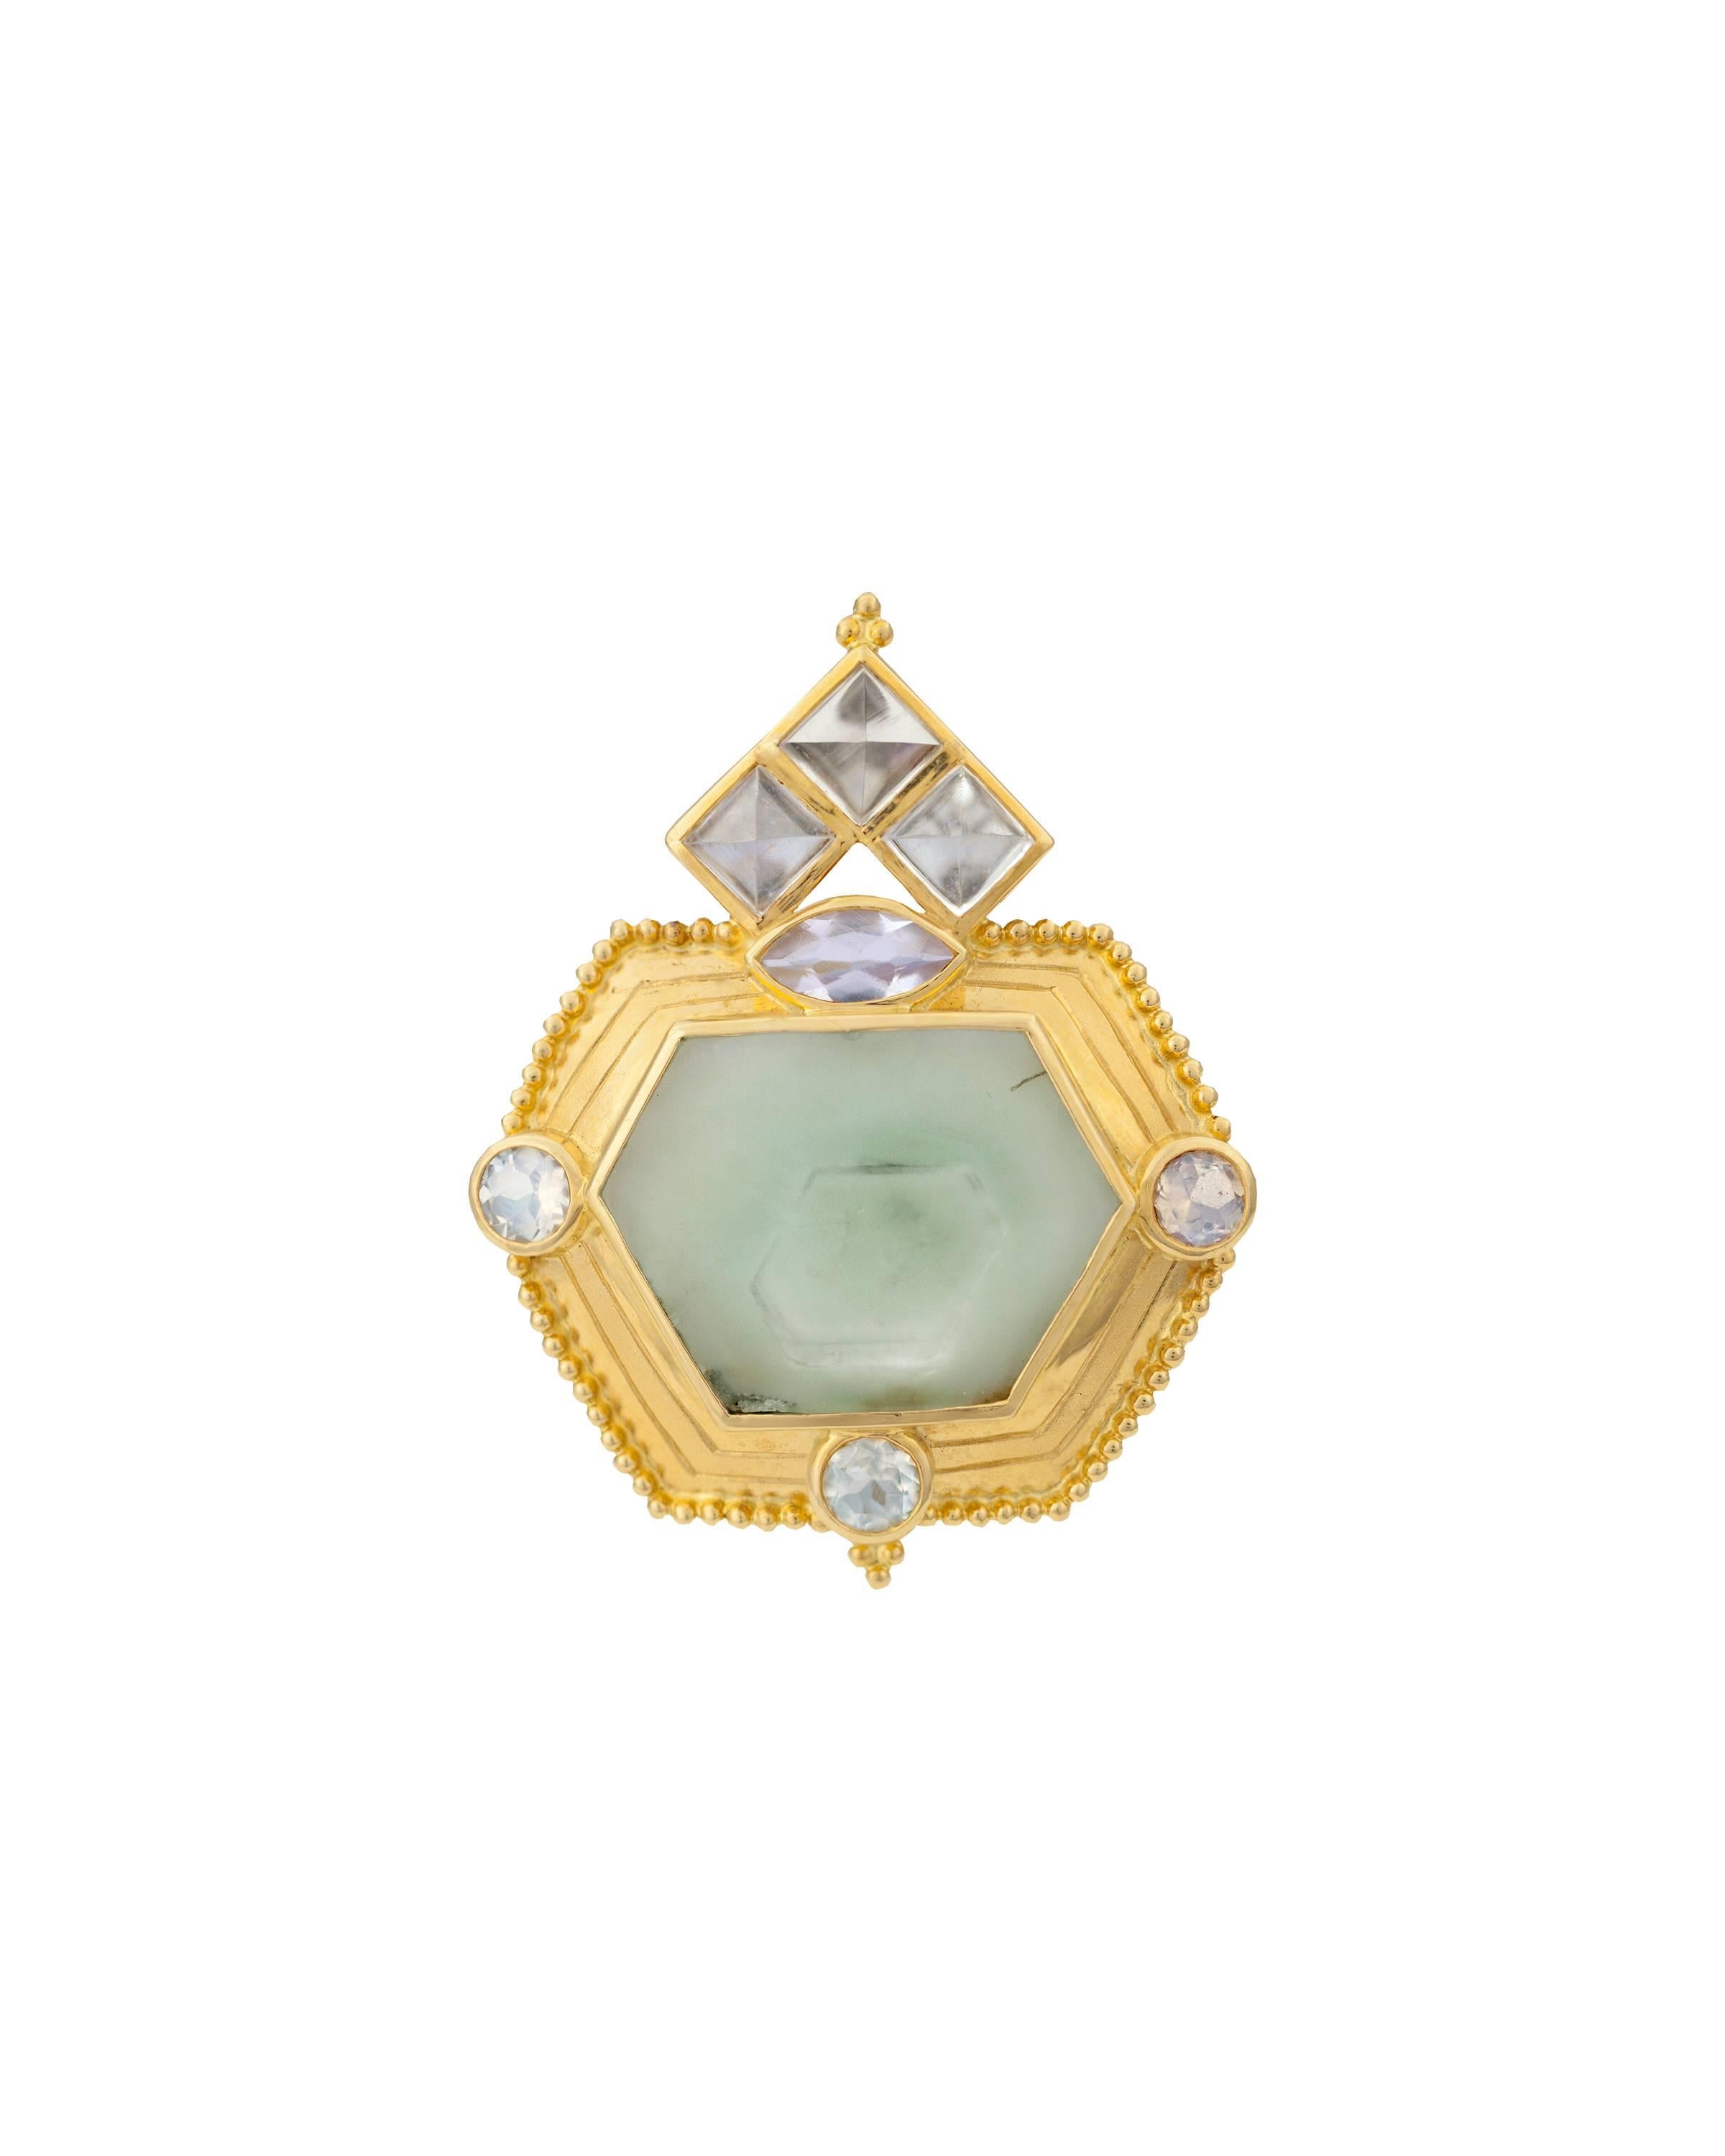 Crevoshay's handmade one of a kind brooch takes one's breath away.  The beryl resides at the center of the piece, with moonstones adding to the allure. 

Moonstone Sq=3.13ct.